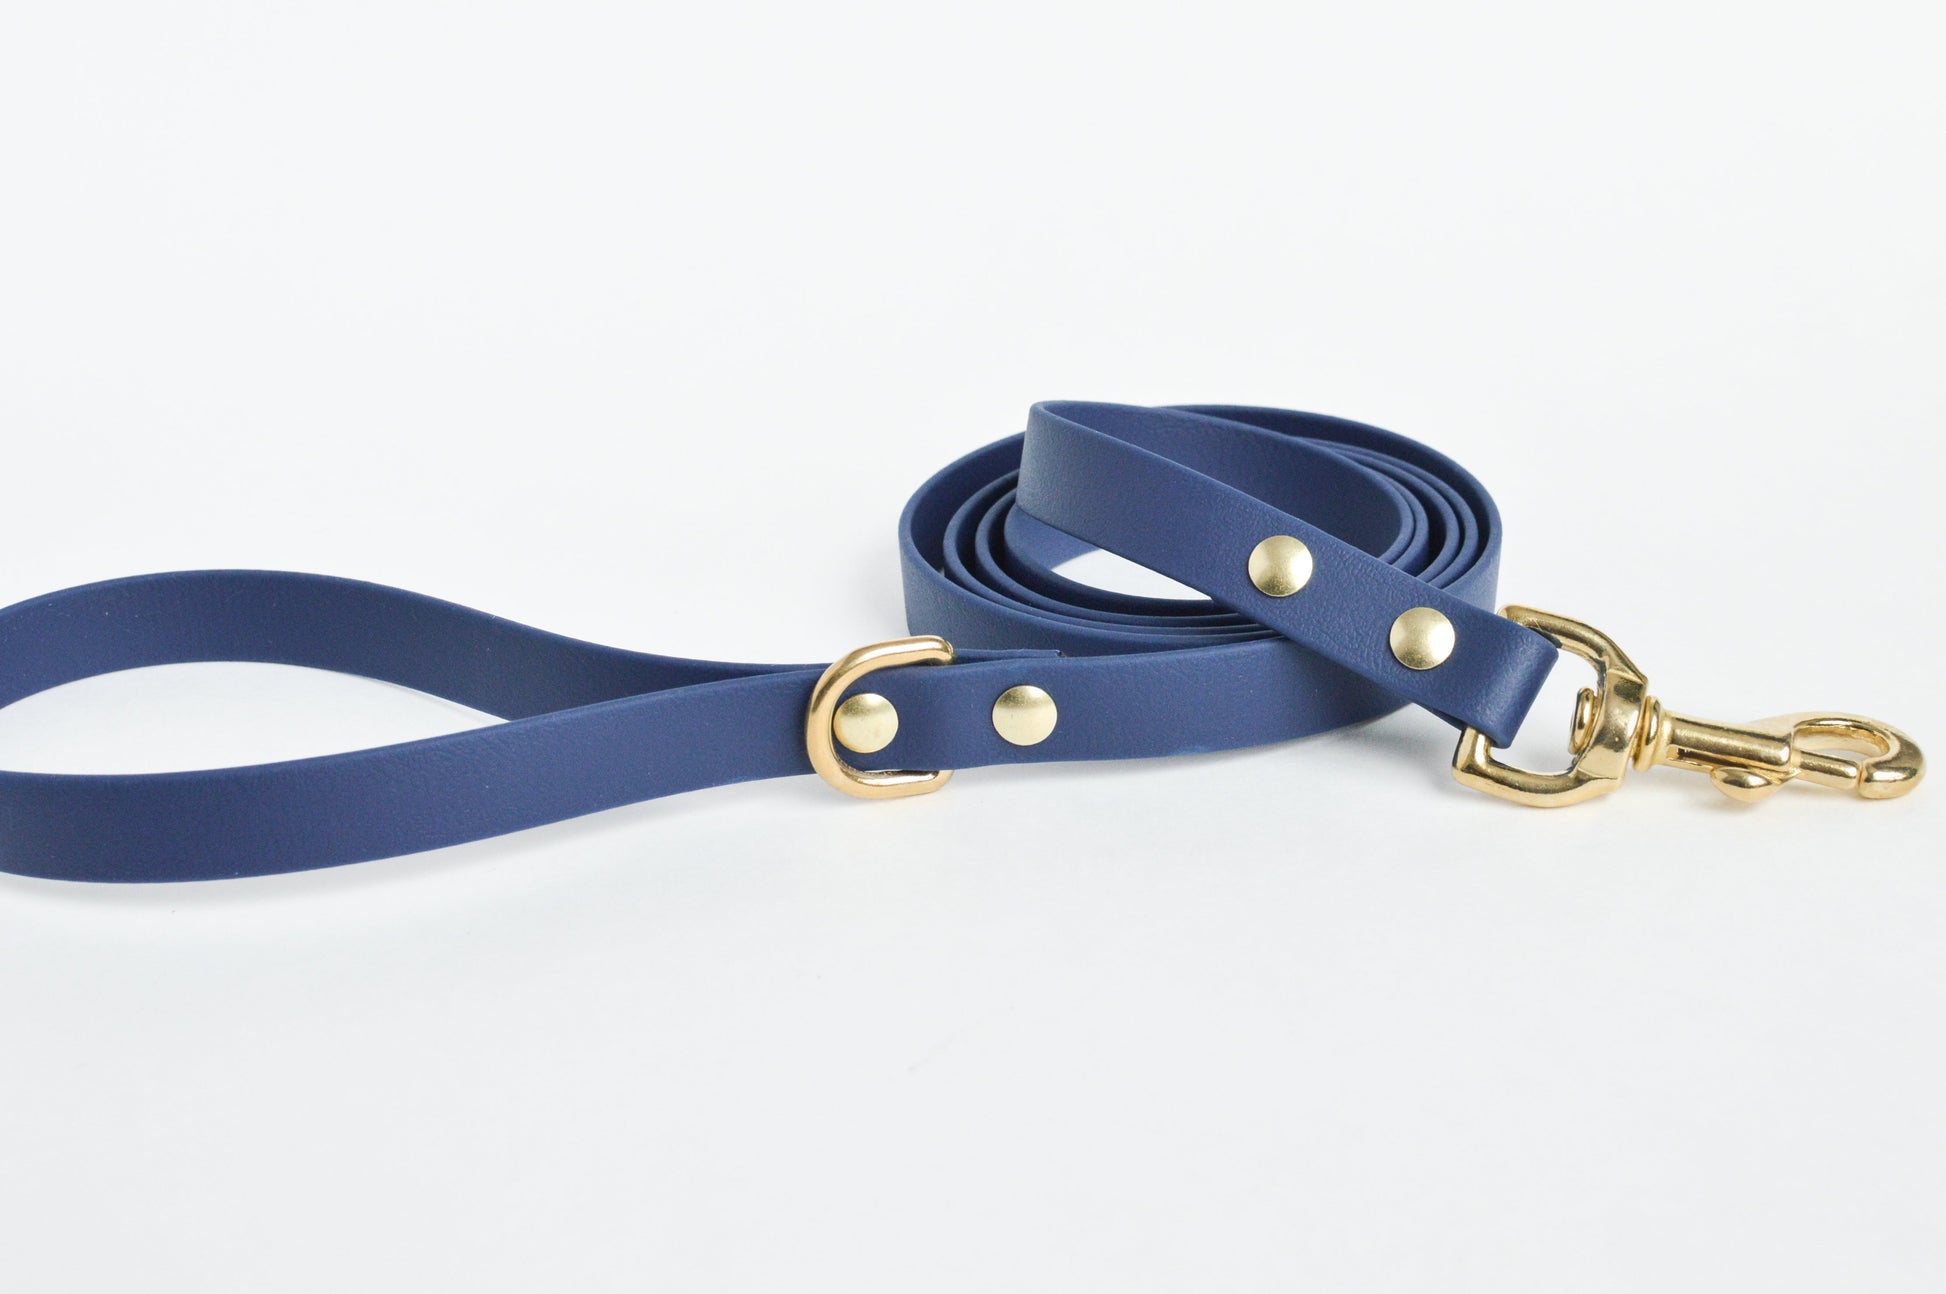 Wanderlust Pup Co. biothane dog leash is waterproof, odour-resistant, and ready for a walk in the city, hike in the woods, or a day at the beach. Made of Biothane with solid brass hardware. Handmade  British Columbia, Canada